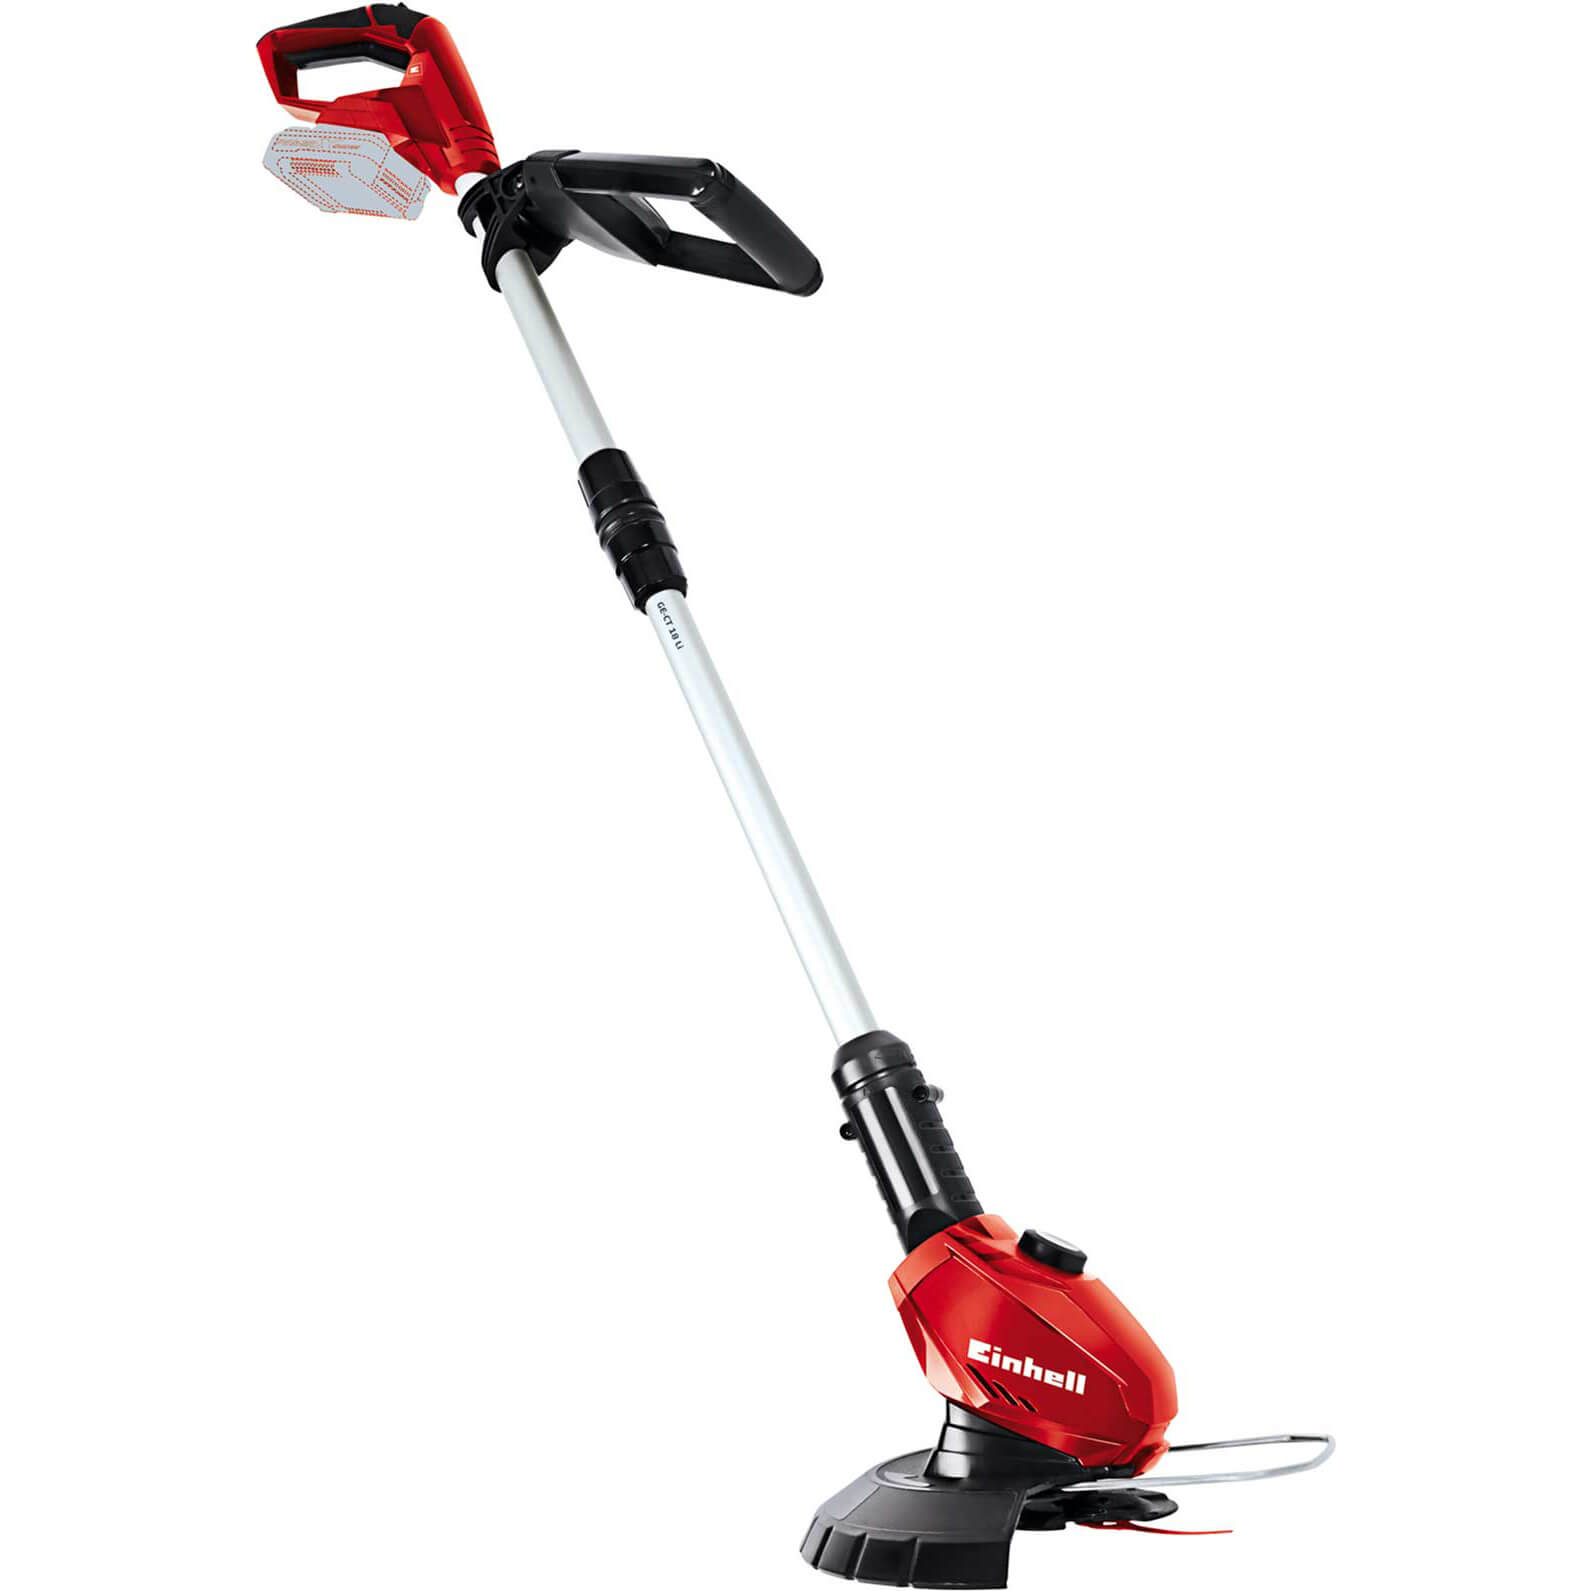 Einhell GE-CT 18 Li 18v Cordless Telescopic Grass Trimmer and Edger 240mm No Batteries No Charger